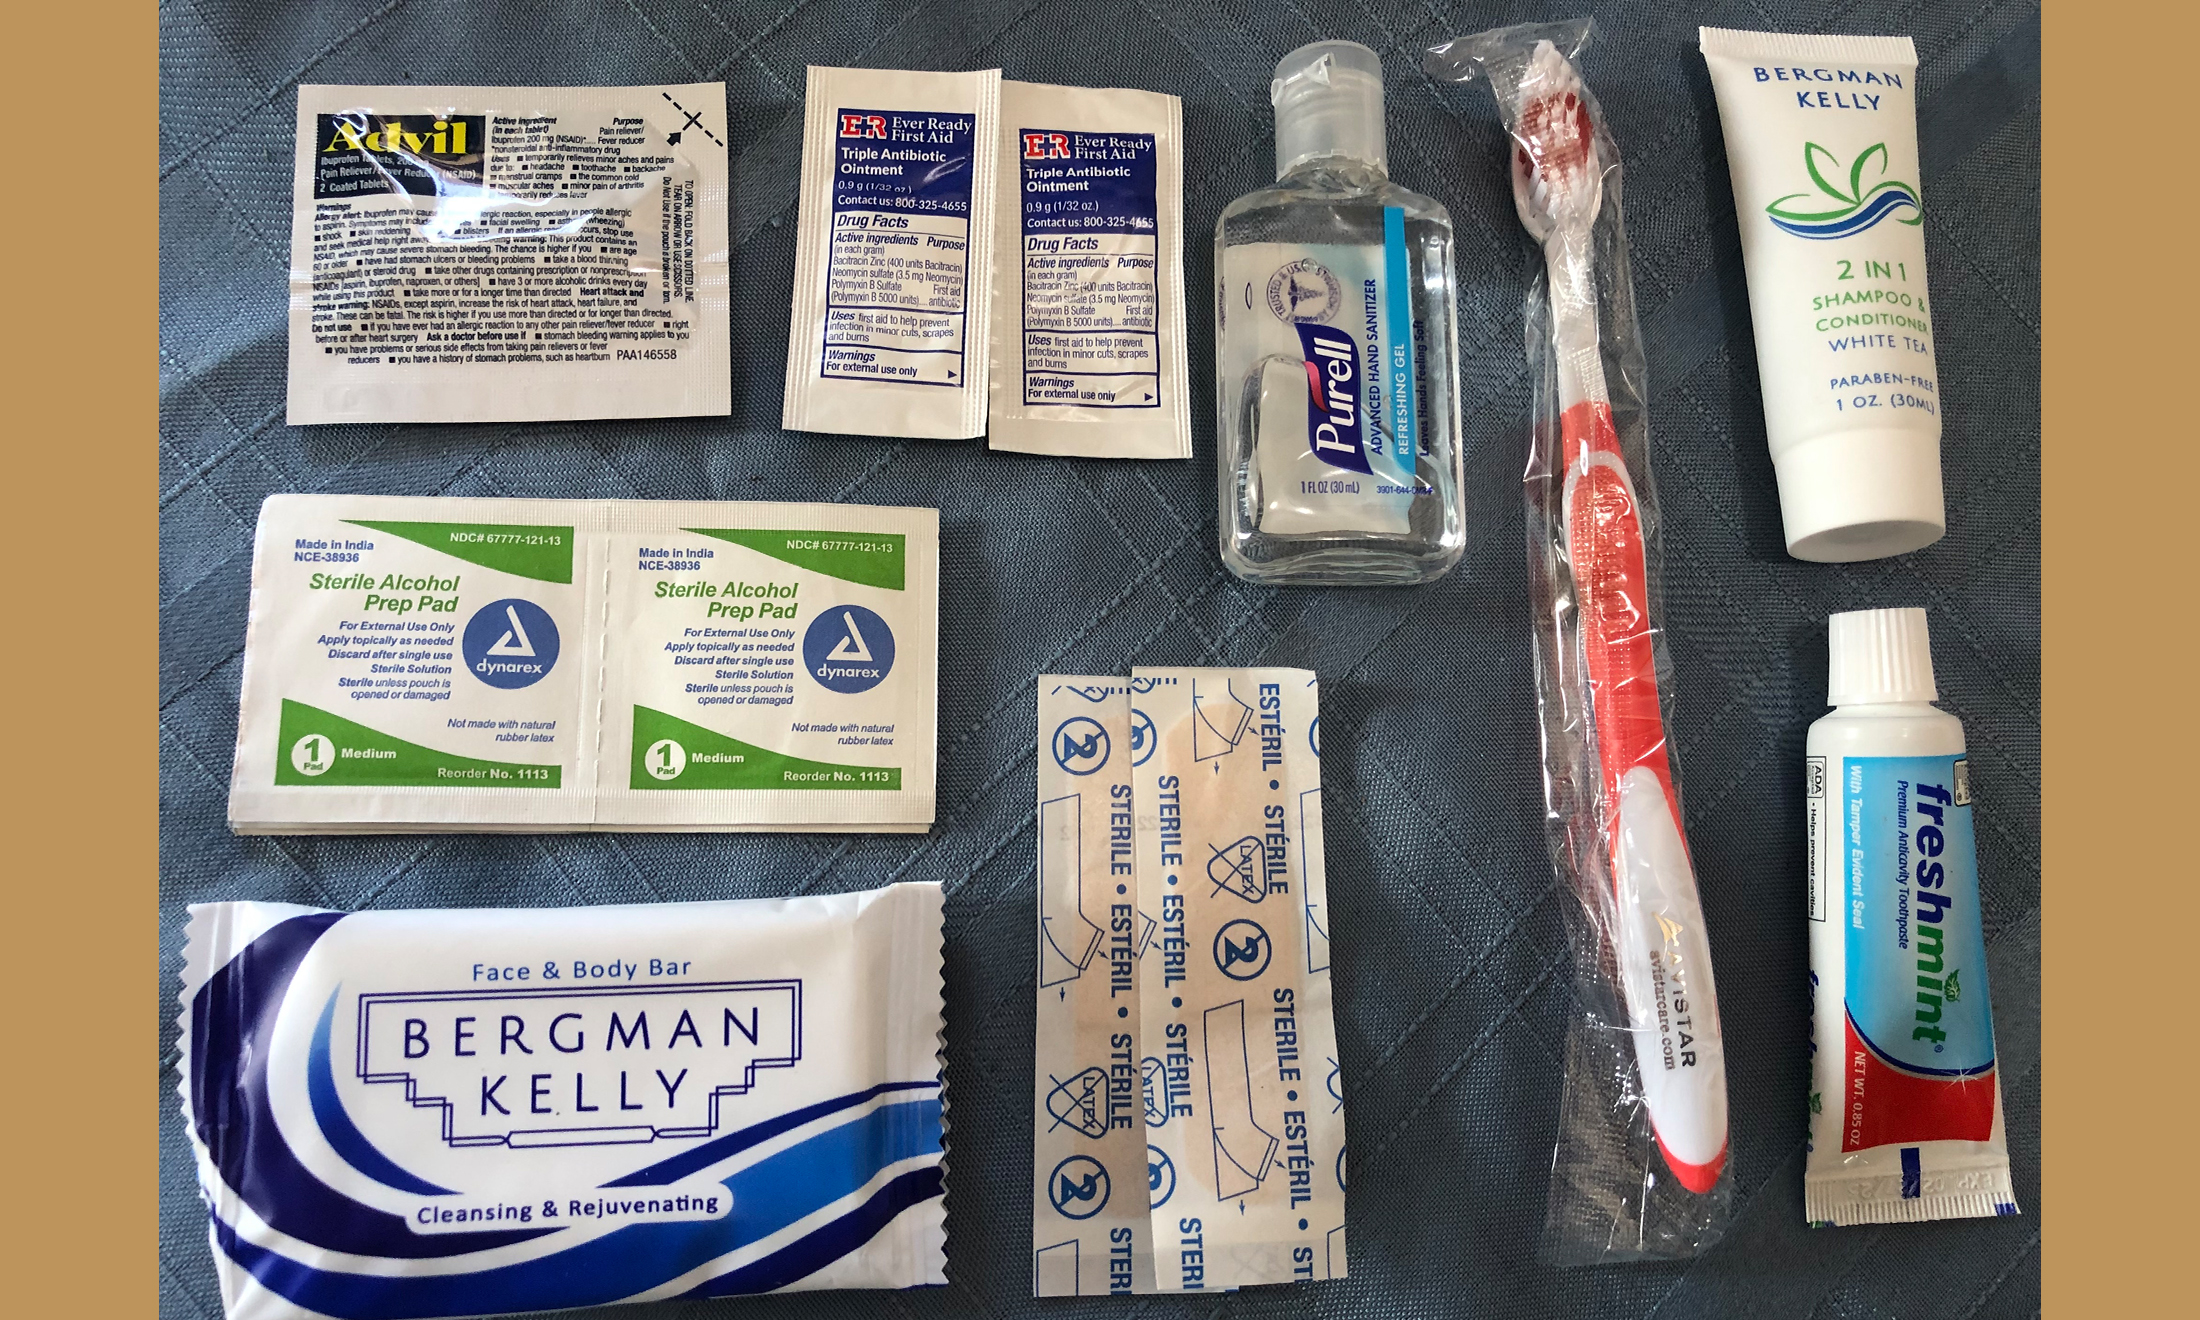 An image of the contents of the hygiene kits